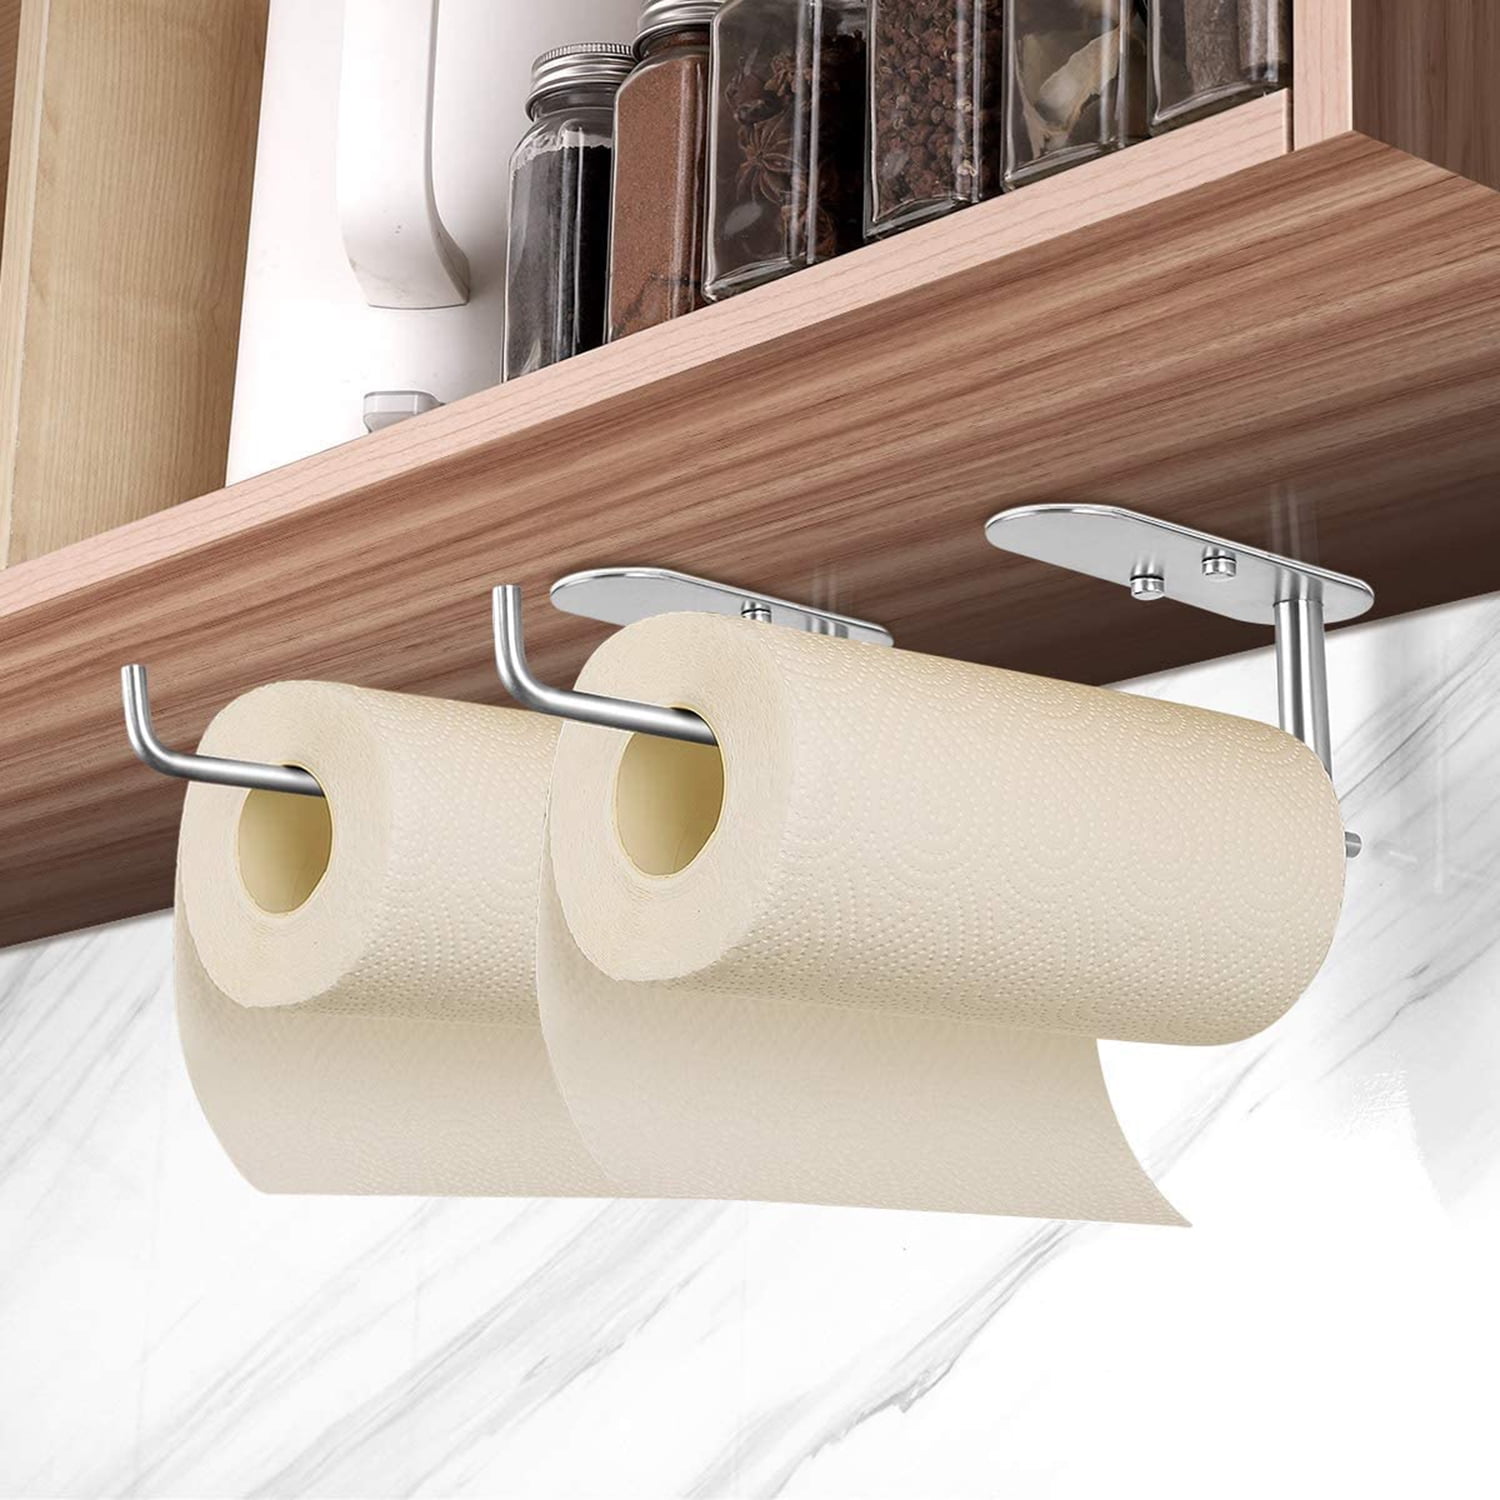 Phancir Paper Towel Holders Wall Mount Kitchen Paper Holder Under Cabinet Silver, Size: 13.38 x 3.56 x 1.77